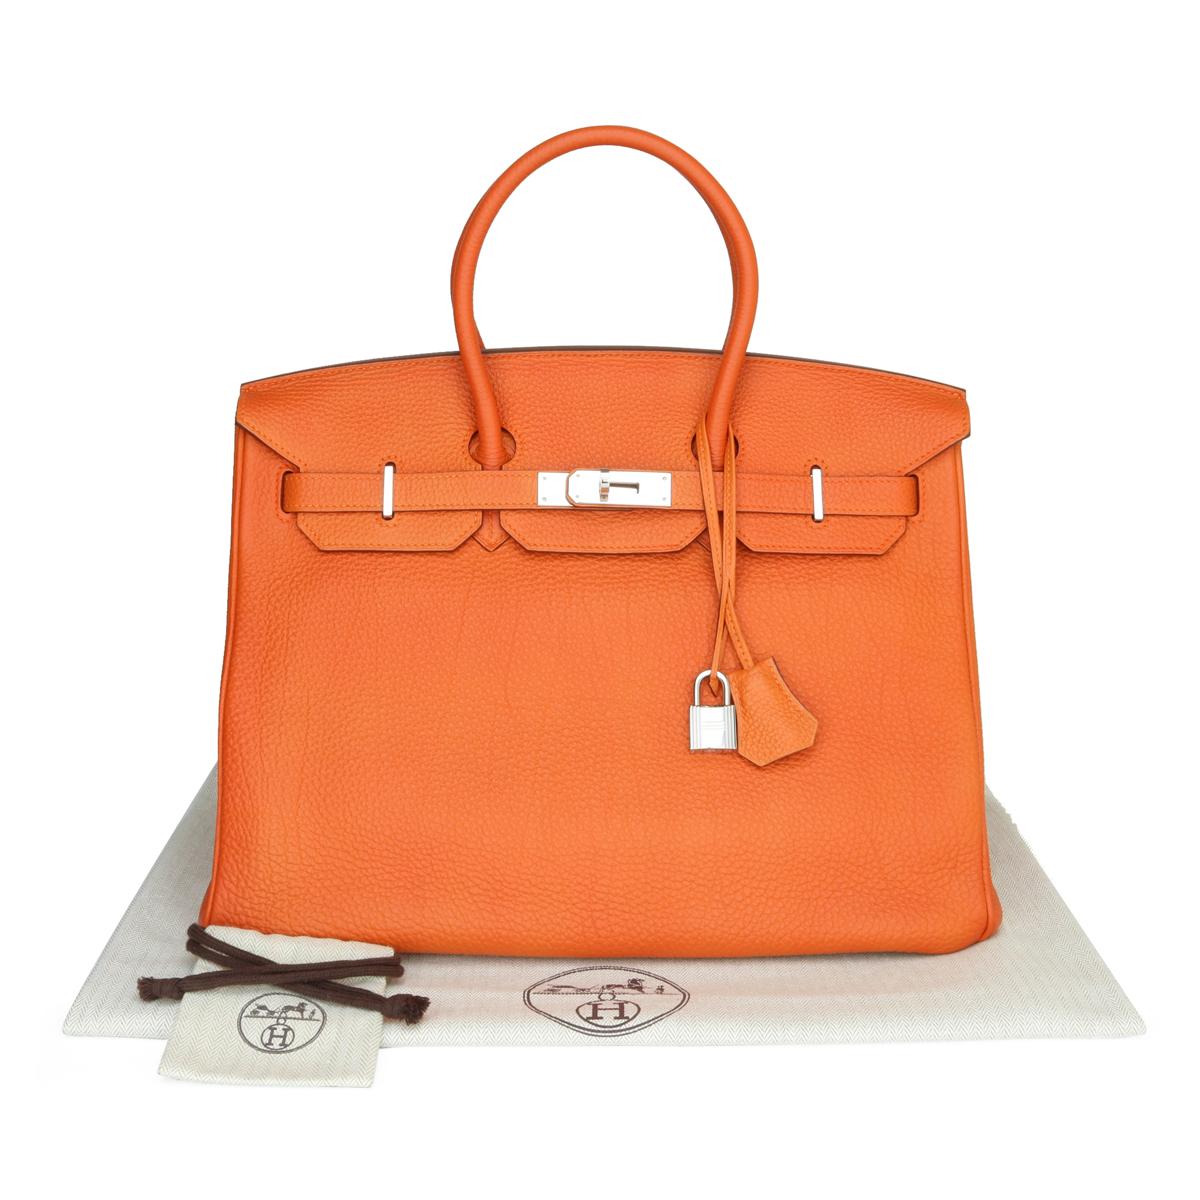 Hermès Birkin Bag 35cm Orange Togo Leather with Palladium Hardware Stamp M_Year 2009.

This bag is still in very good condition. The leather still smells fresh and holds to the original shape. The hardware is still very shiny.

A truly stunning